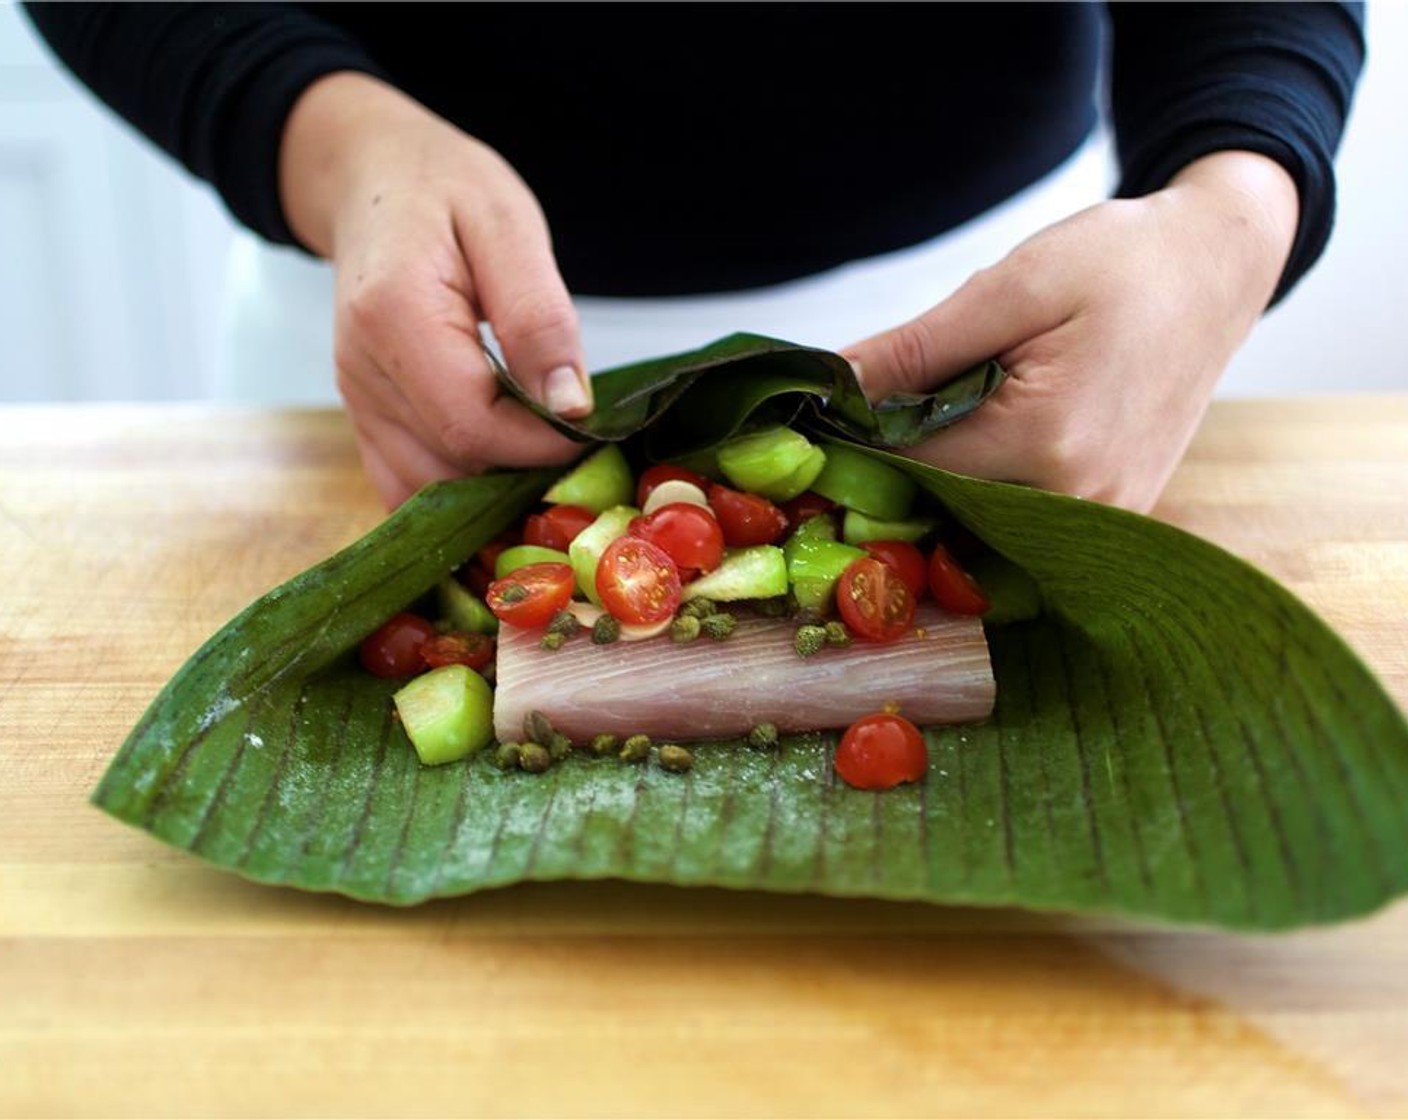 step 4 Working quickly, pat the banana leaves dry with paper towels and place them flat on a work surface. Pat the Mahi-Mahi Fillets (2) dry with paper towels and place them in the center of the banana leaves. Season the fish with Salt (1/4 tsp) each side of the fillets.